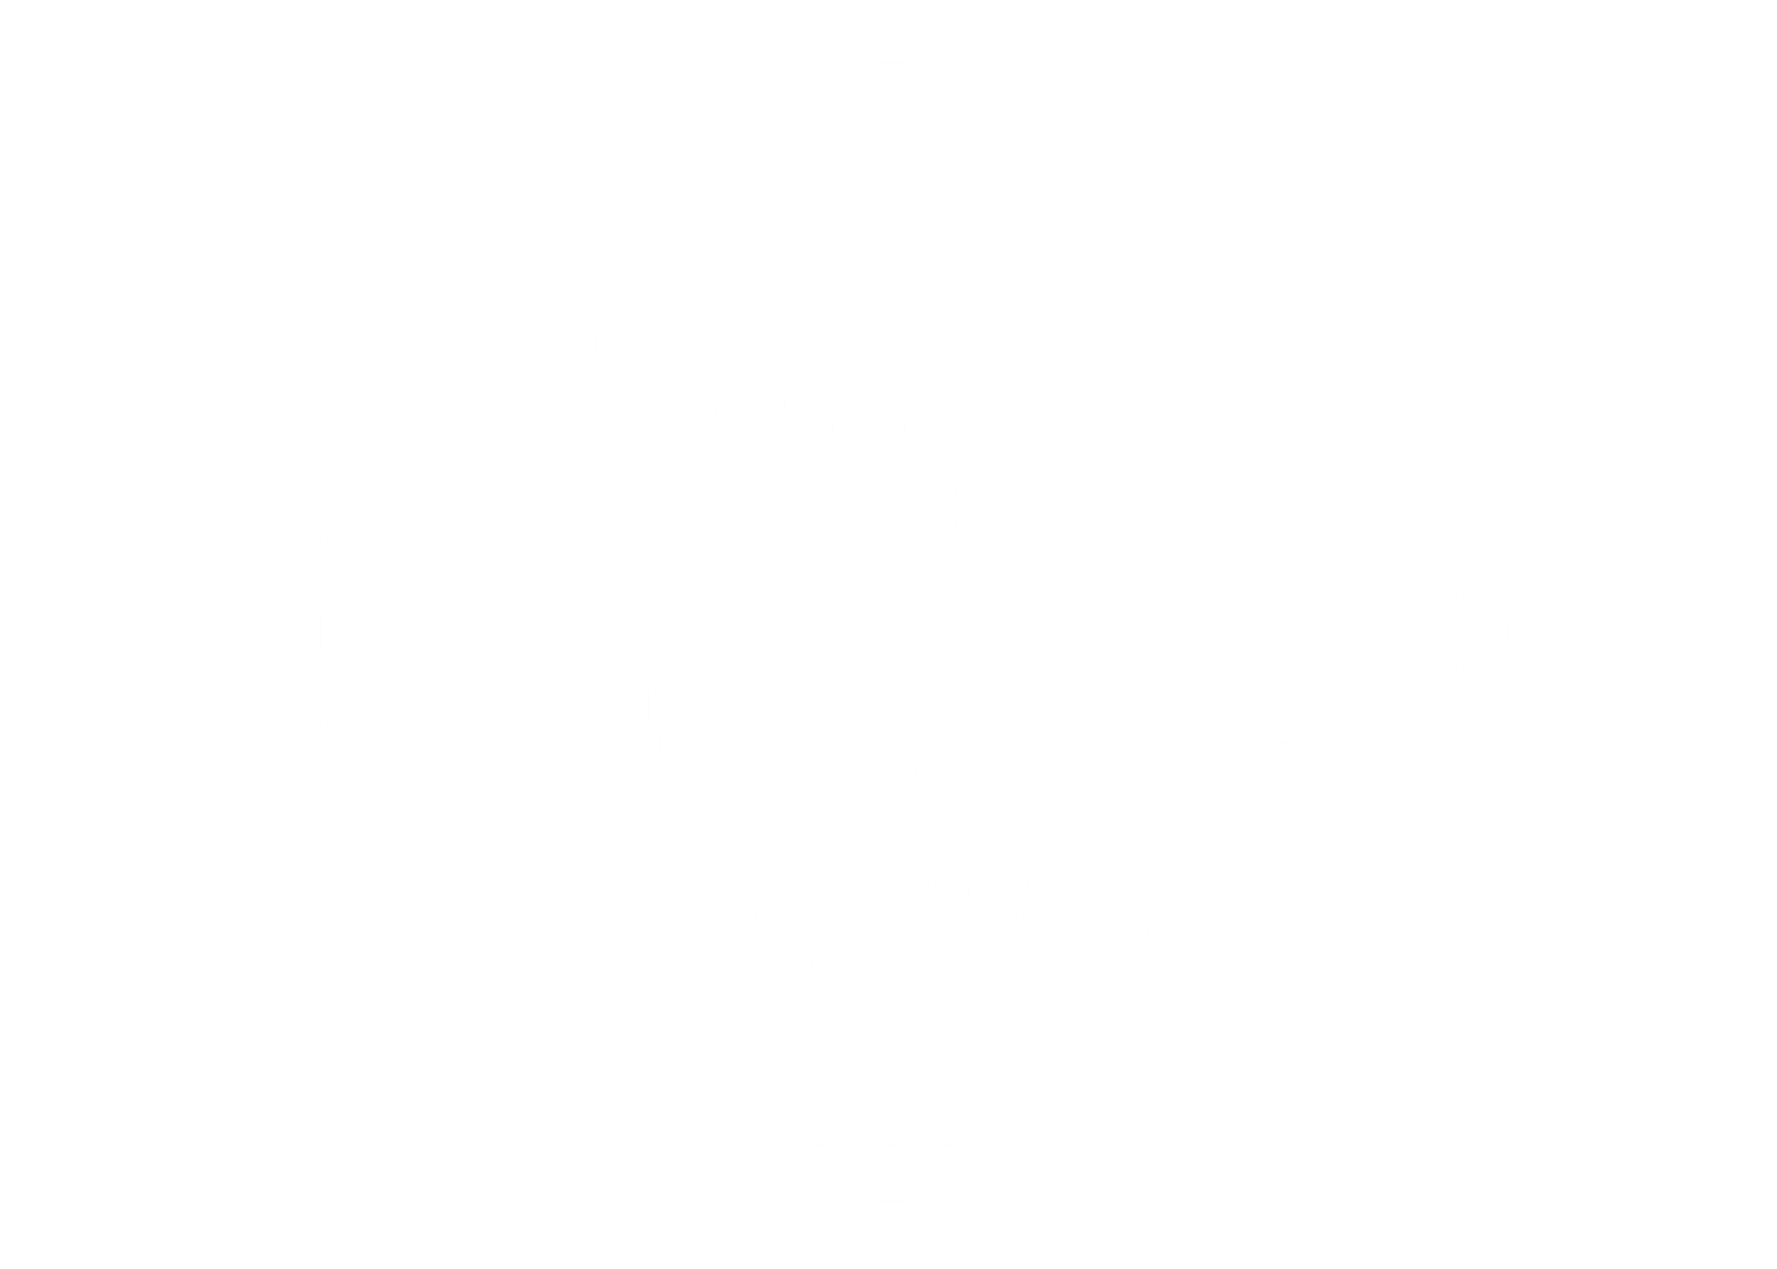 The Little Lunch Company